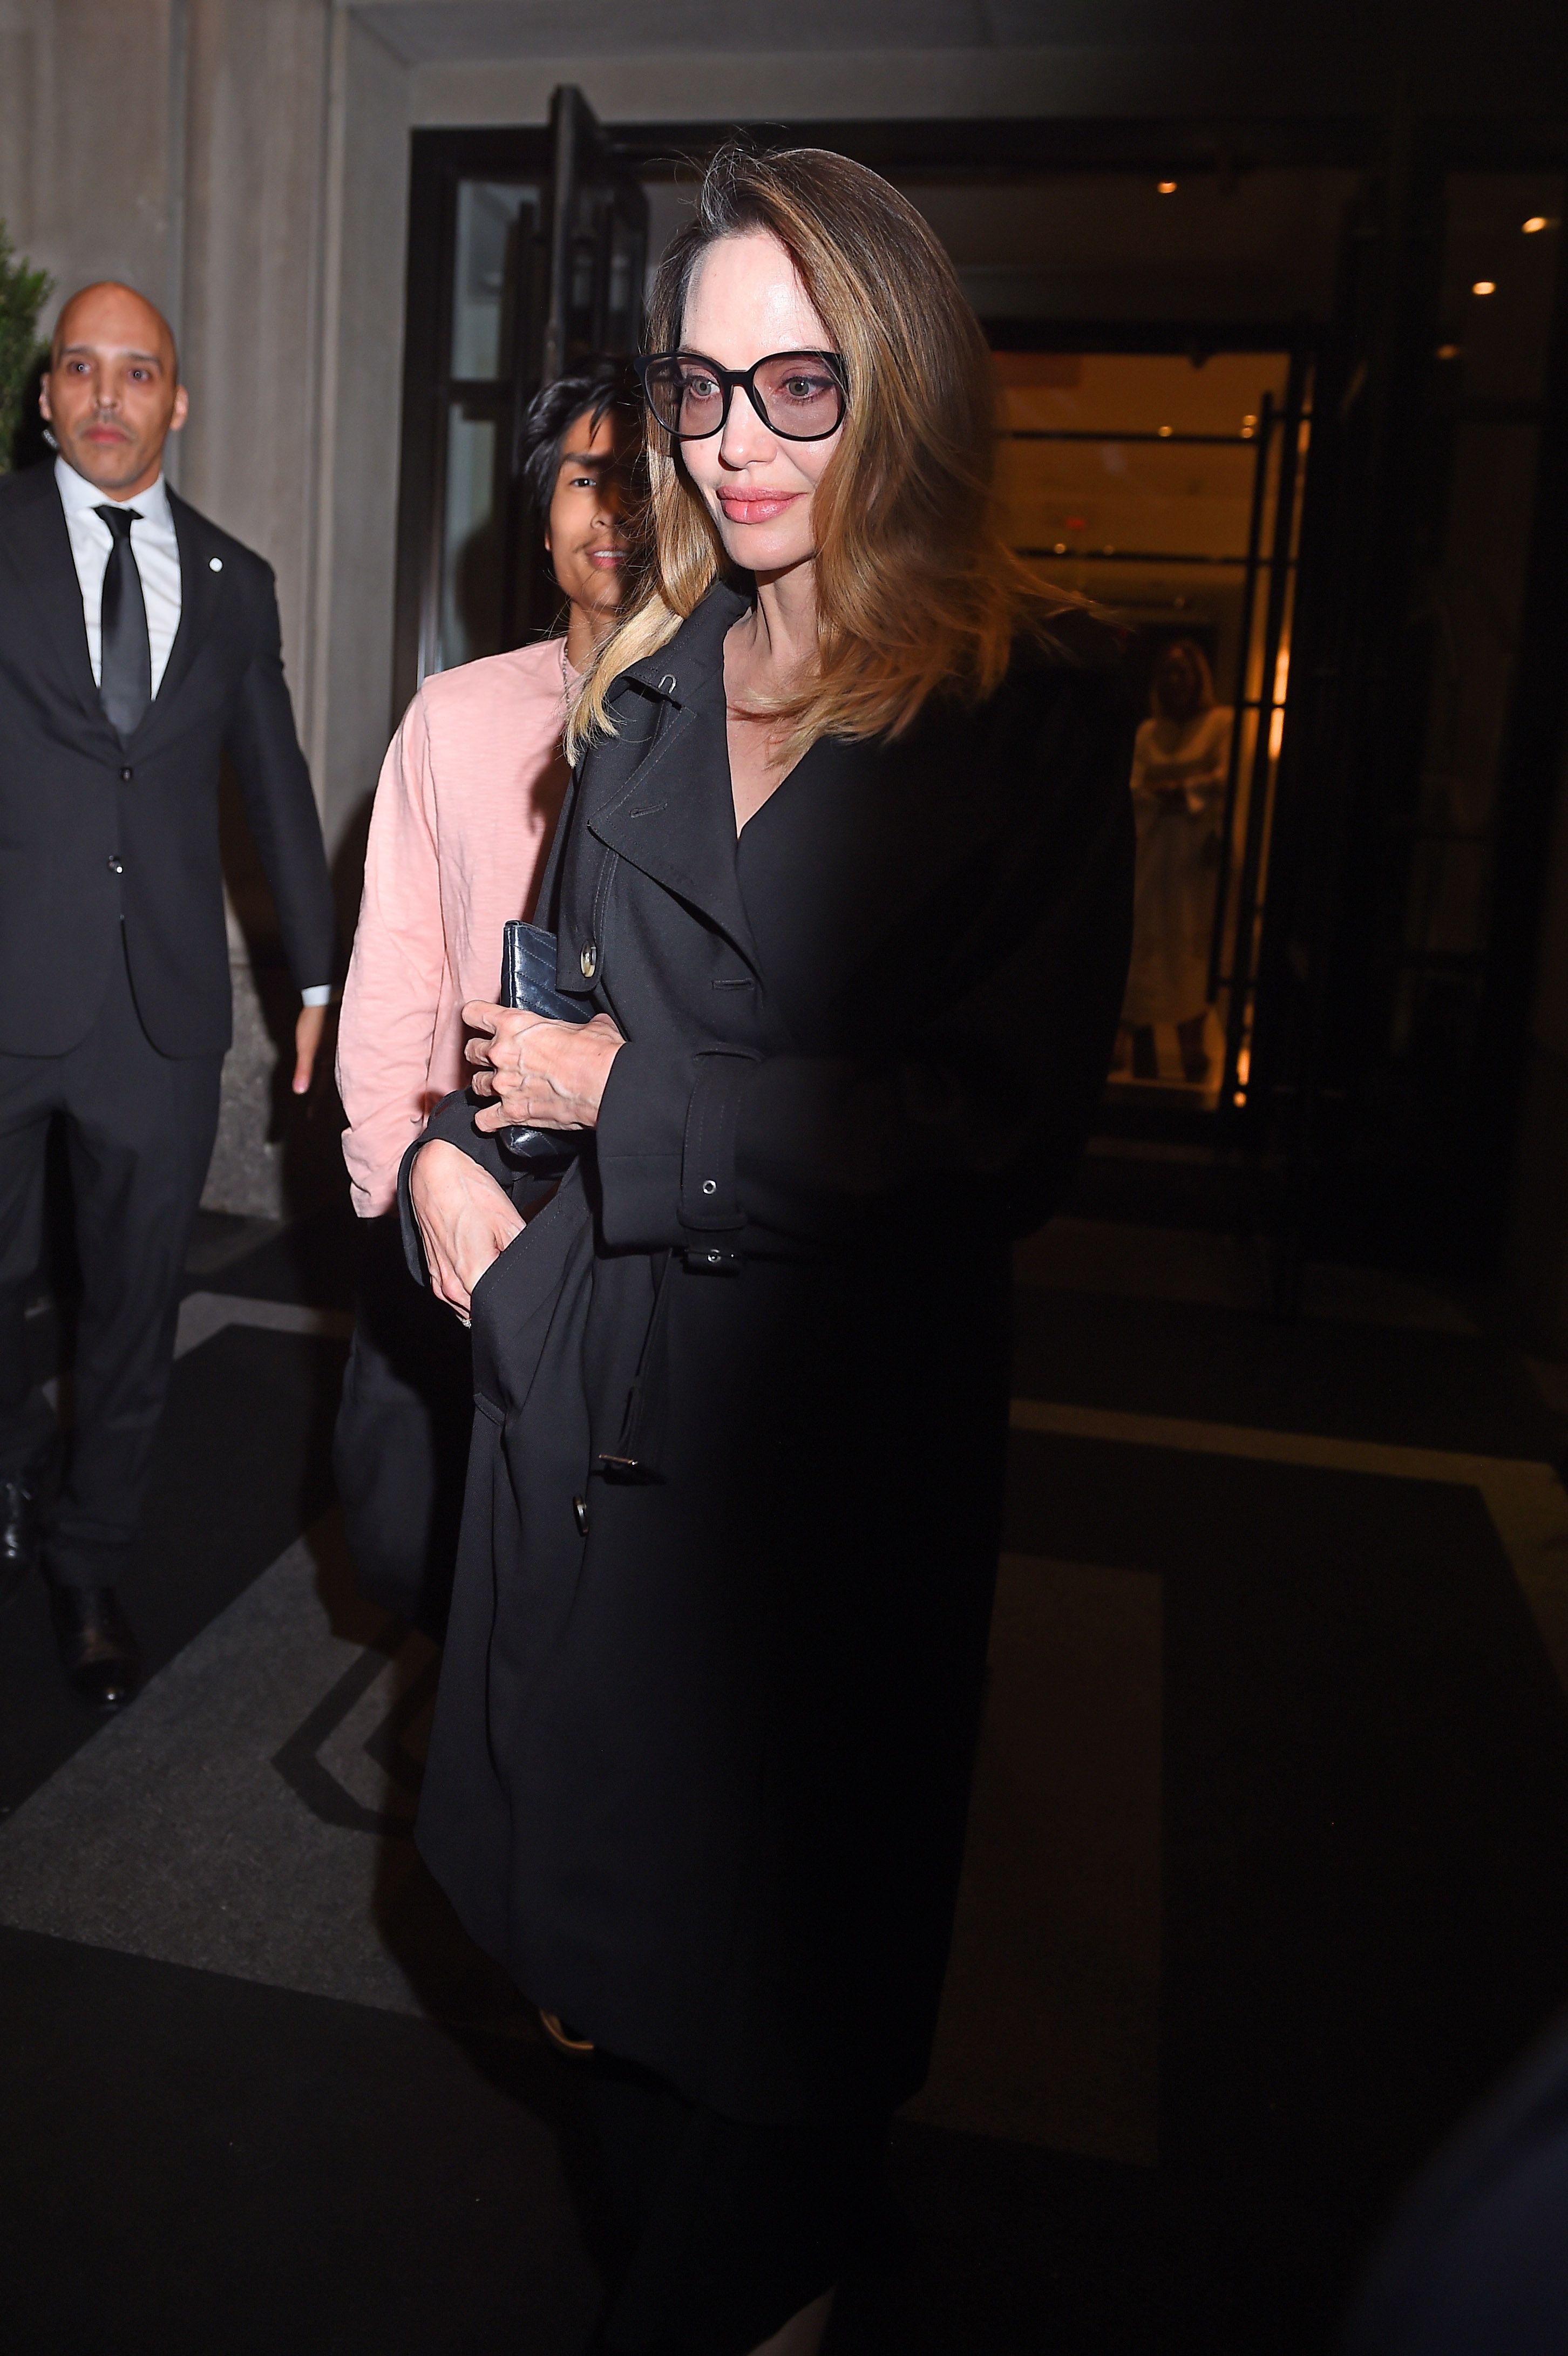 Angelina Jolie's Classic Style While Shopping: Dior Coat, Black